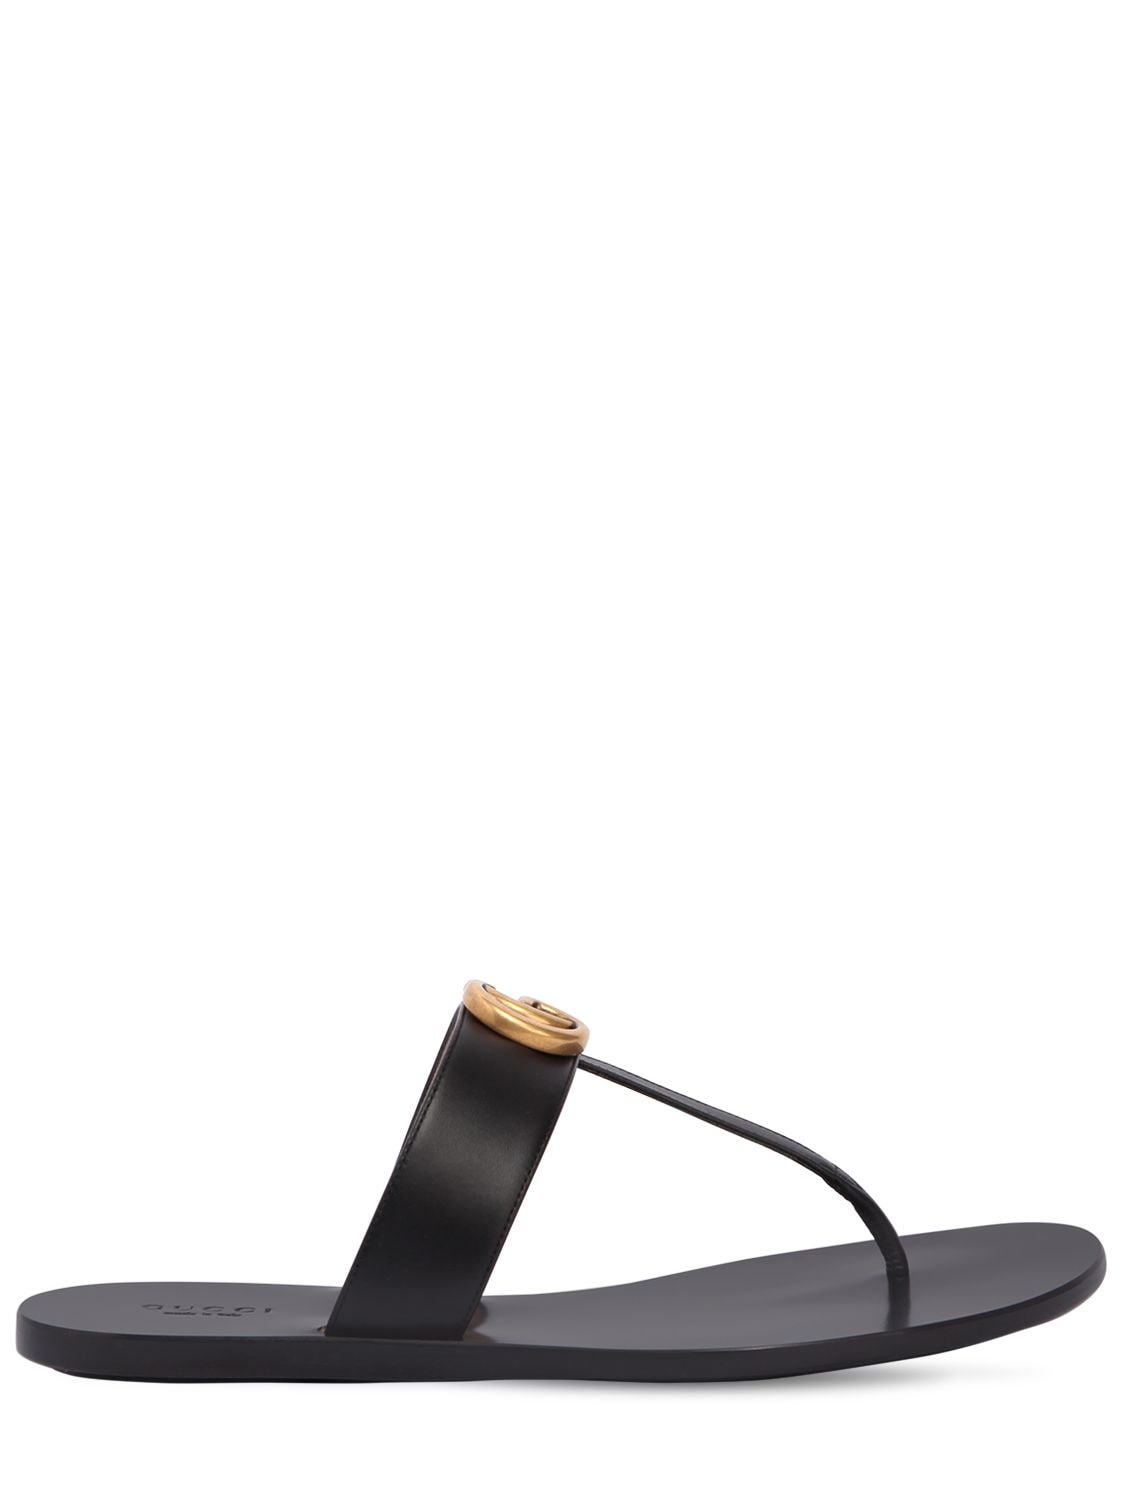 GUCCI 10MM MARMONT LEATHER THONG SANDALS 71IMU9033-MTAWMA2